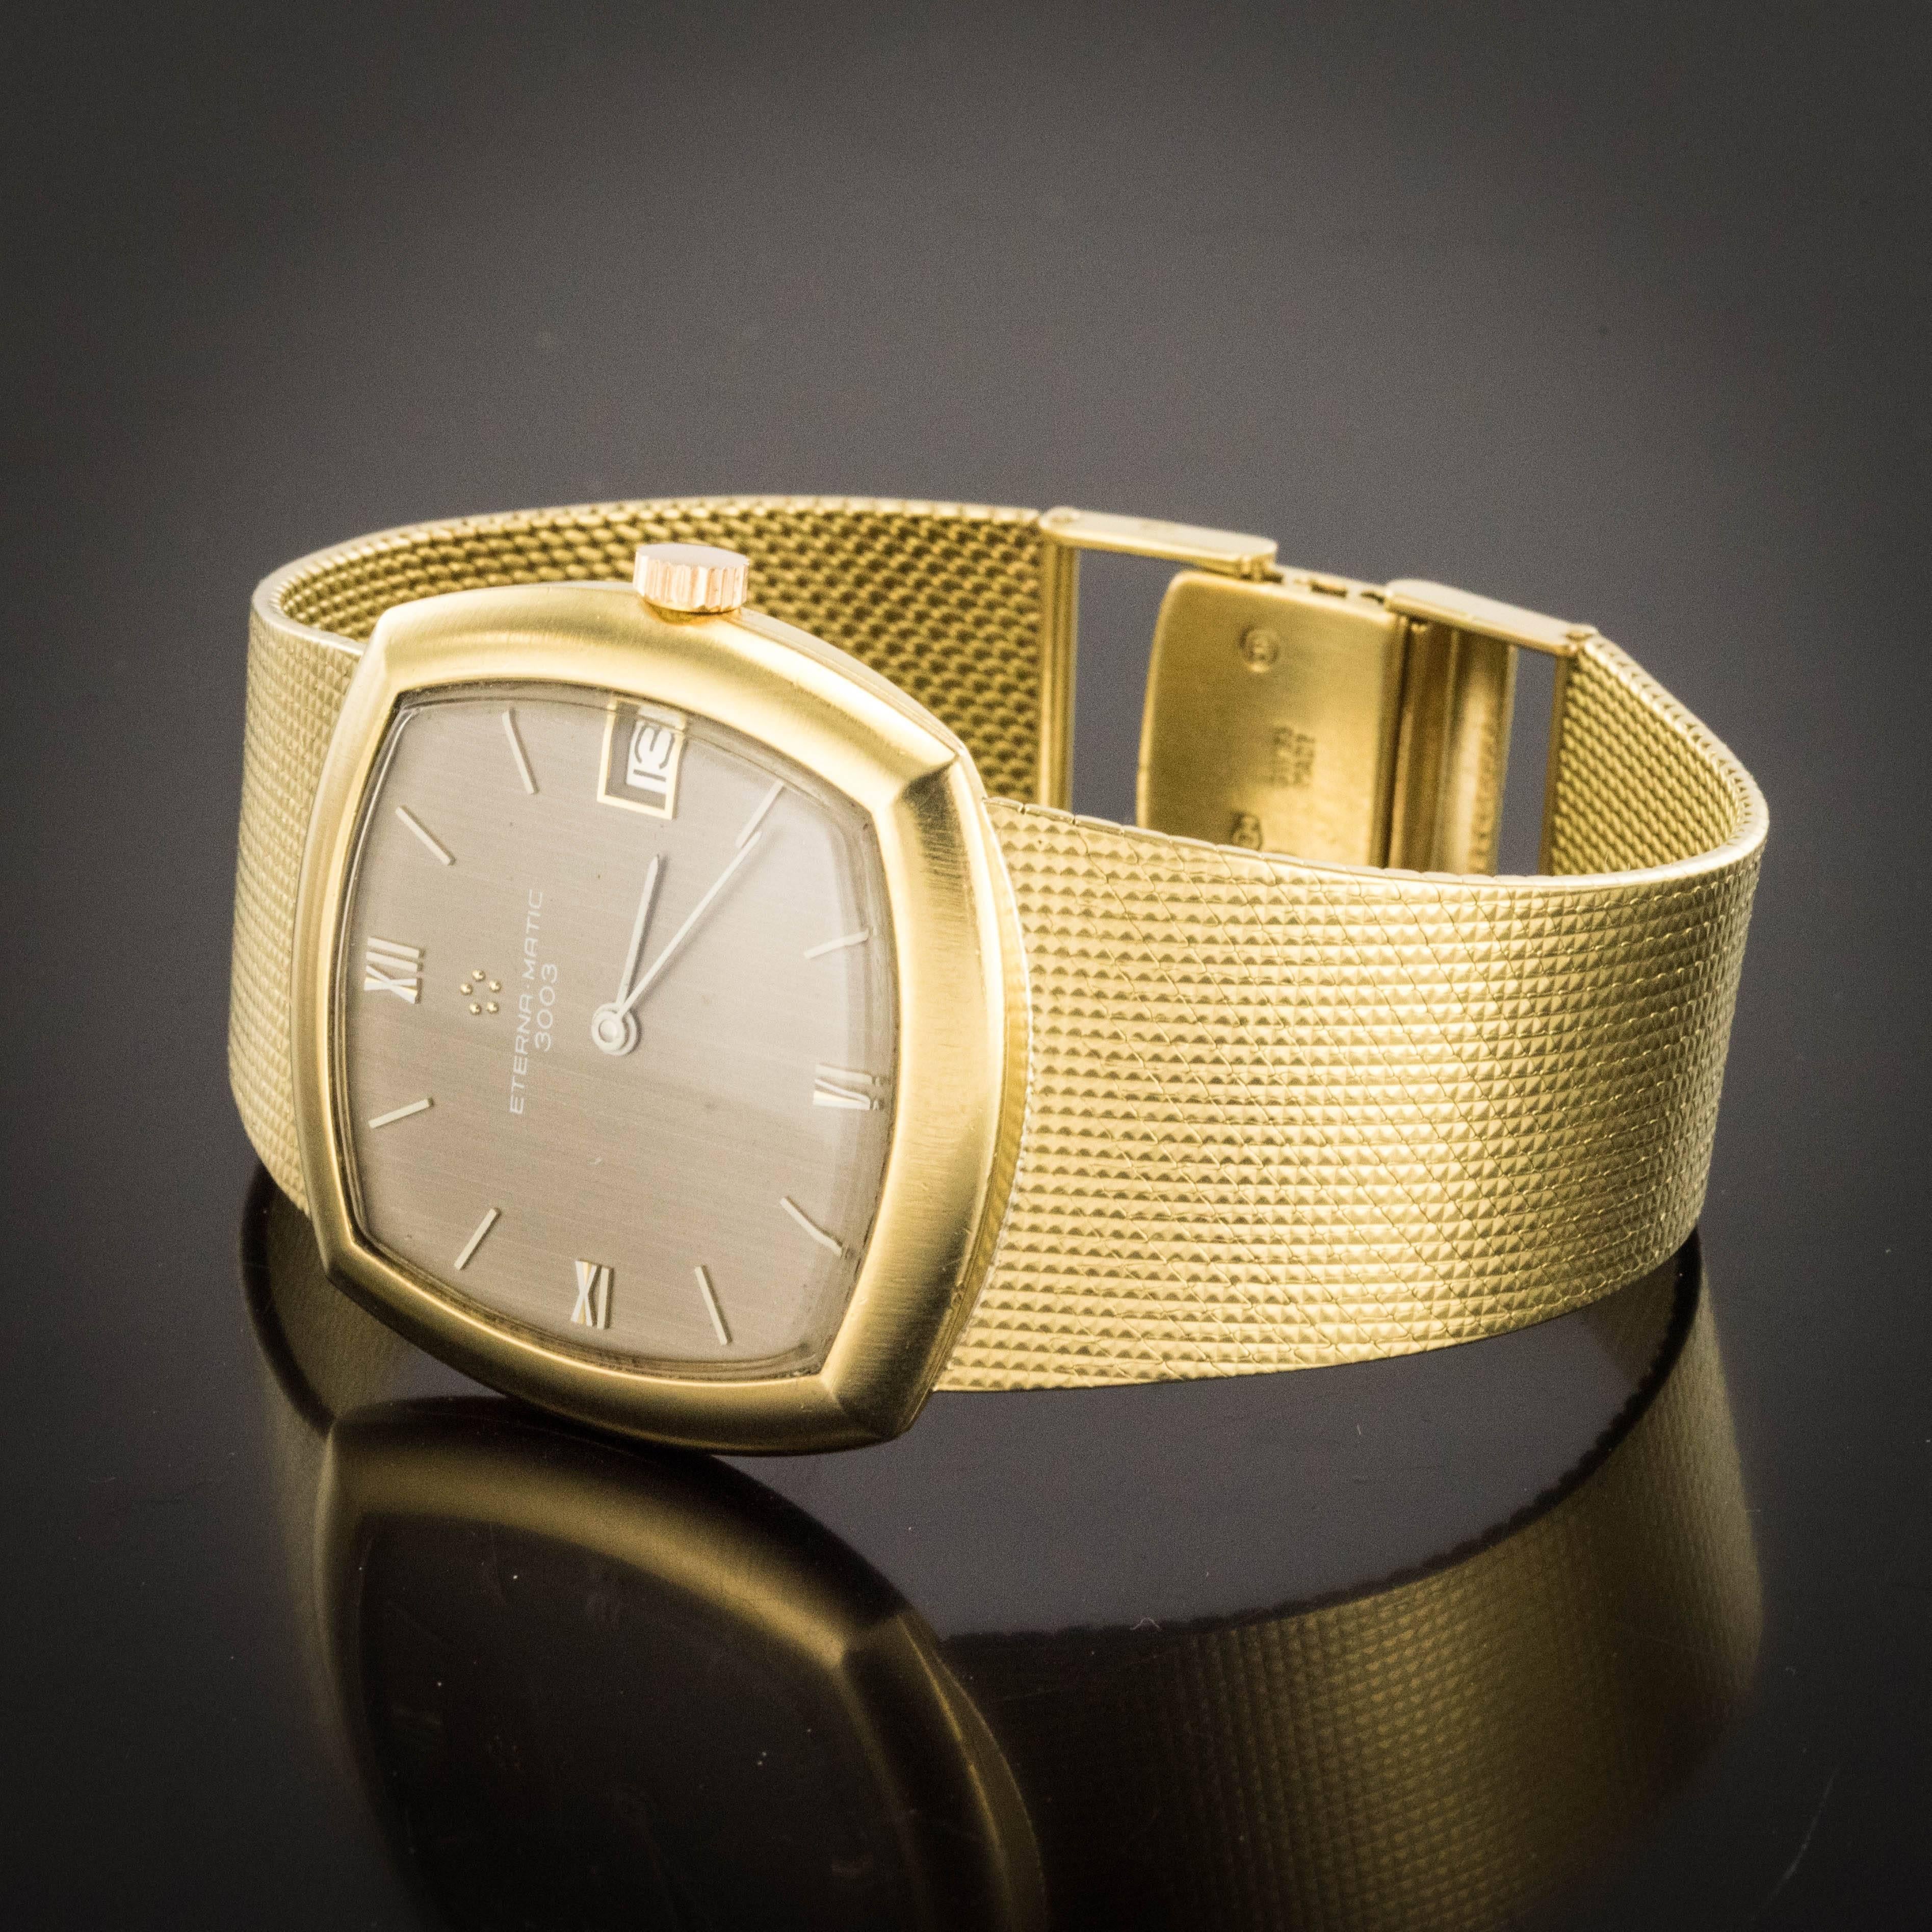 Watch in 18 karats yellow gold, owl and weevil hallmark.
Square shape, this vintage gold watch is ultra-flat. The bracelet is a braided mesh ultra flat and flexible. The clasp is on a scale.
The dial is glossy brown.
Height of the dial: 3.3 cm,